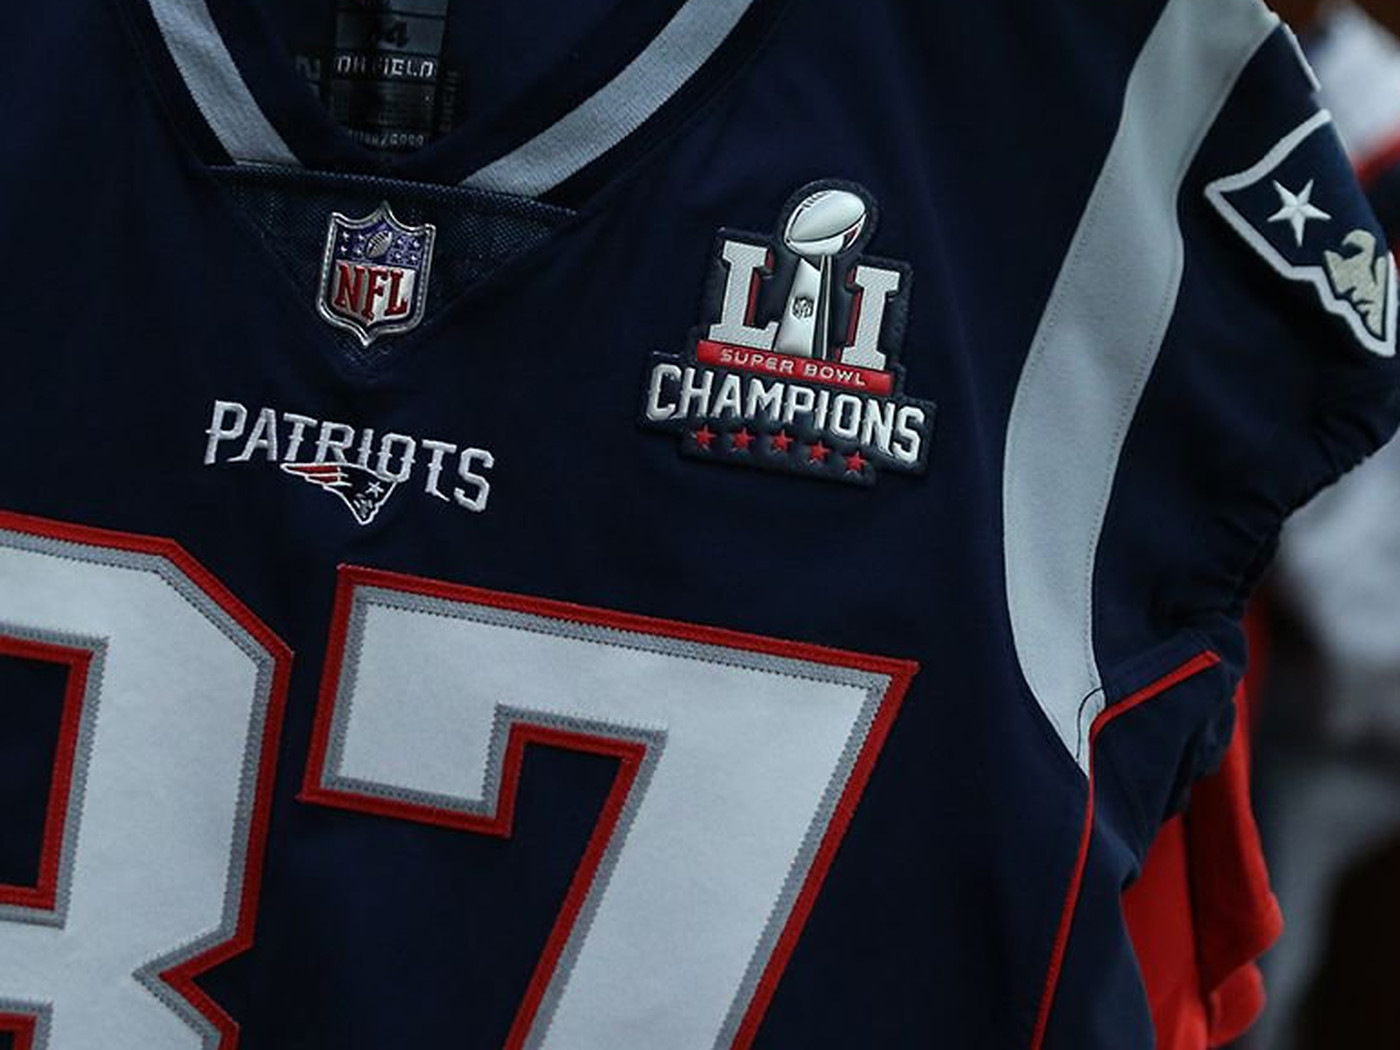 The Patriots will be playing with Super Bowl LI patches that look ...